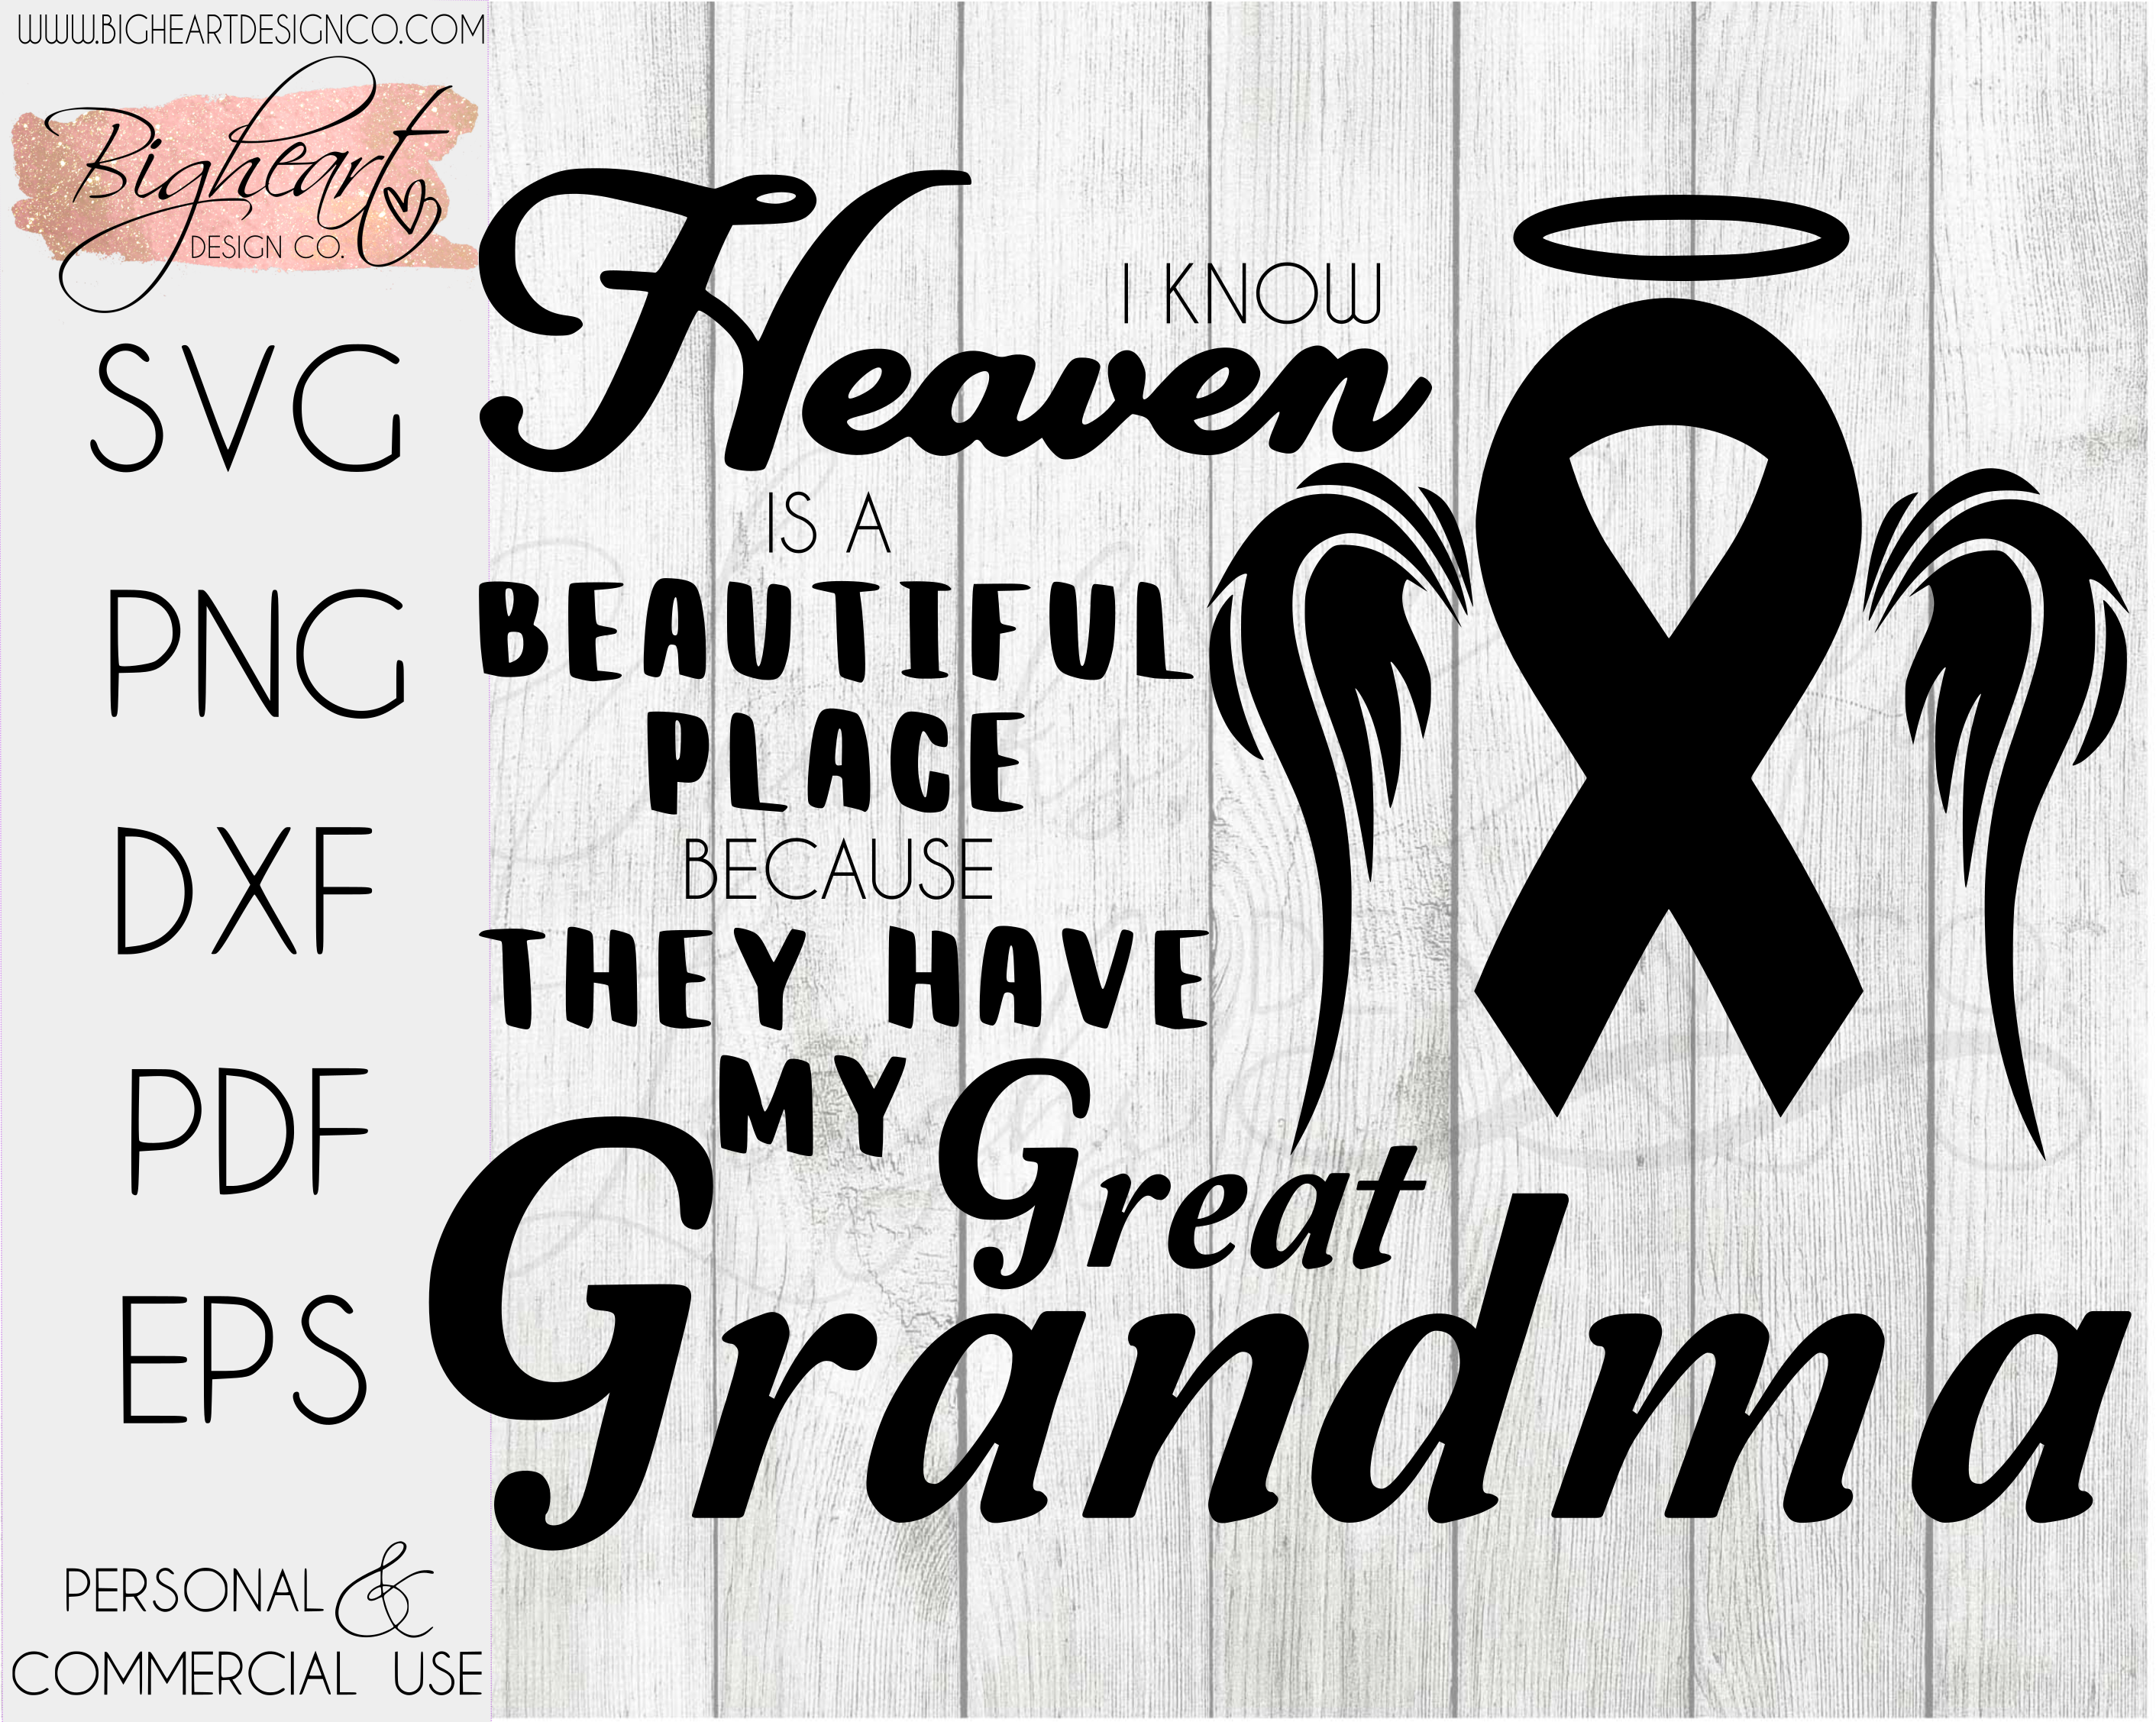 Download I Know Heaven Is A Beautiful Place Because They Have My Great Grandma Svg Awareness Ribbon Svg Change The Color Of Ribbon To Personalize Bigheart Design Co